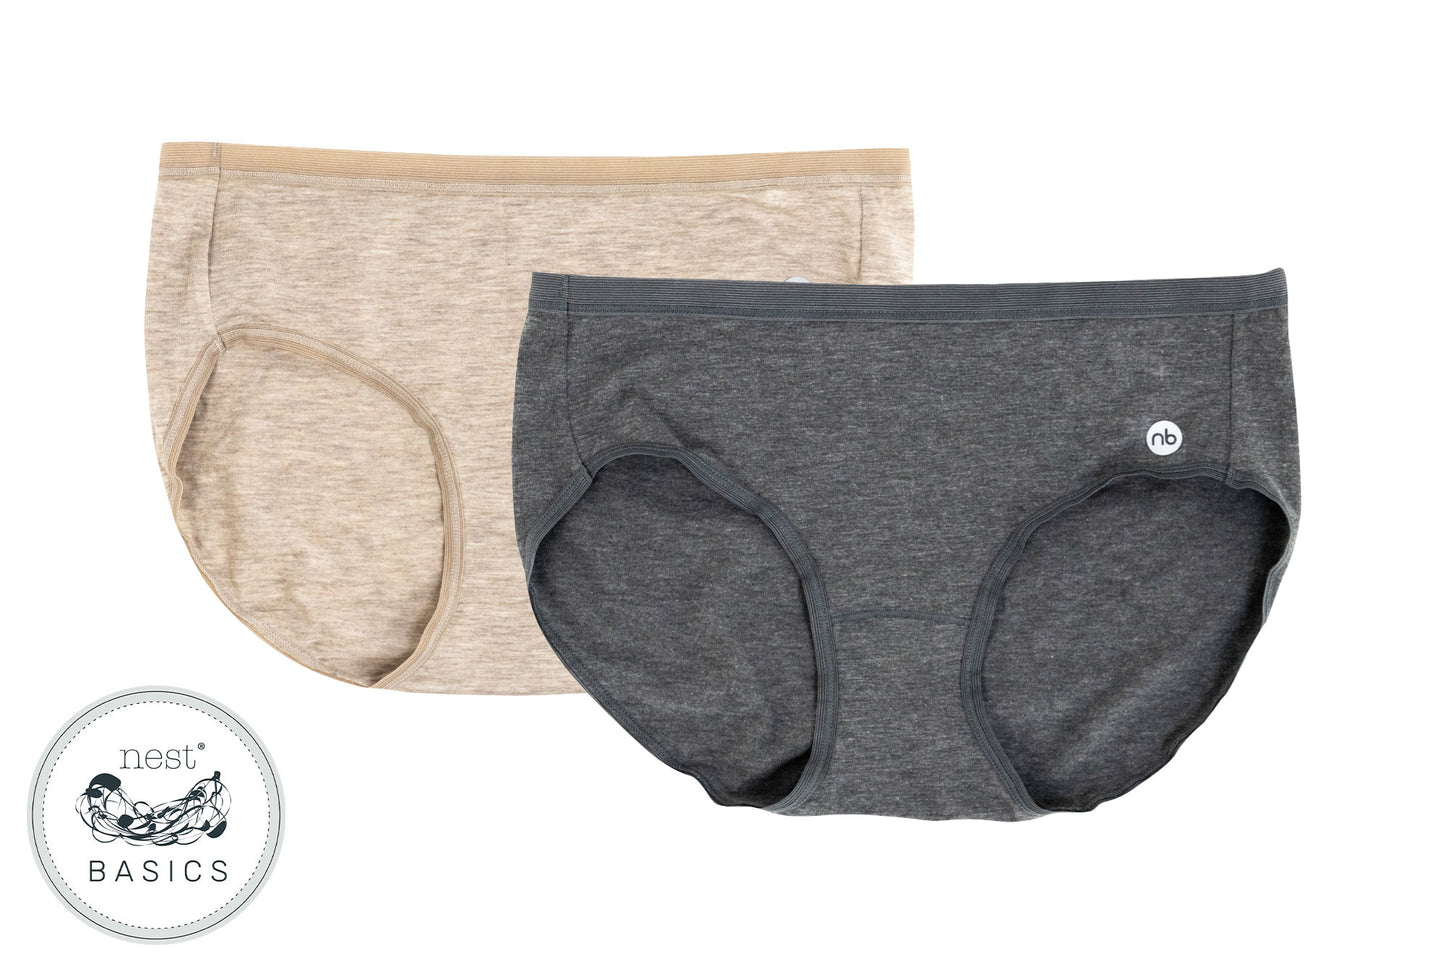 Women's Basics Bamboo Cotton Underwear (2 Pack) - Warm Taupe and Charcoal - Nest Designs